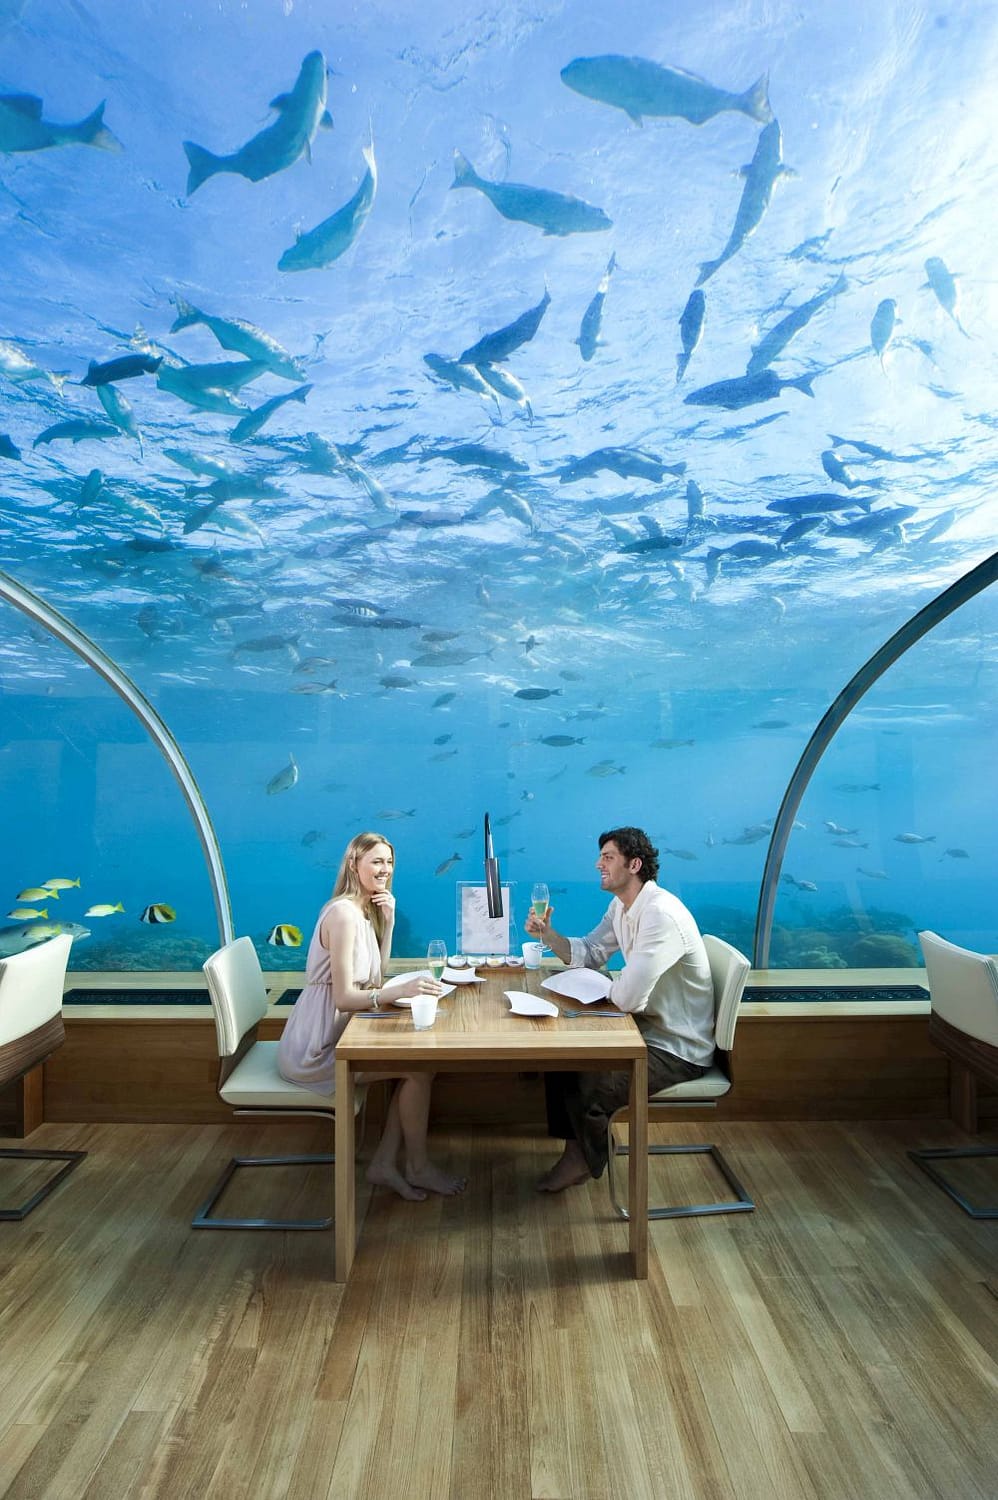 Dining Under the Sea